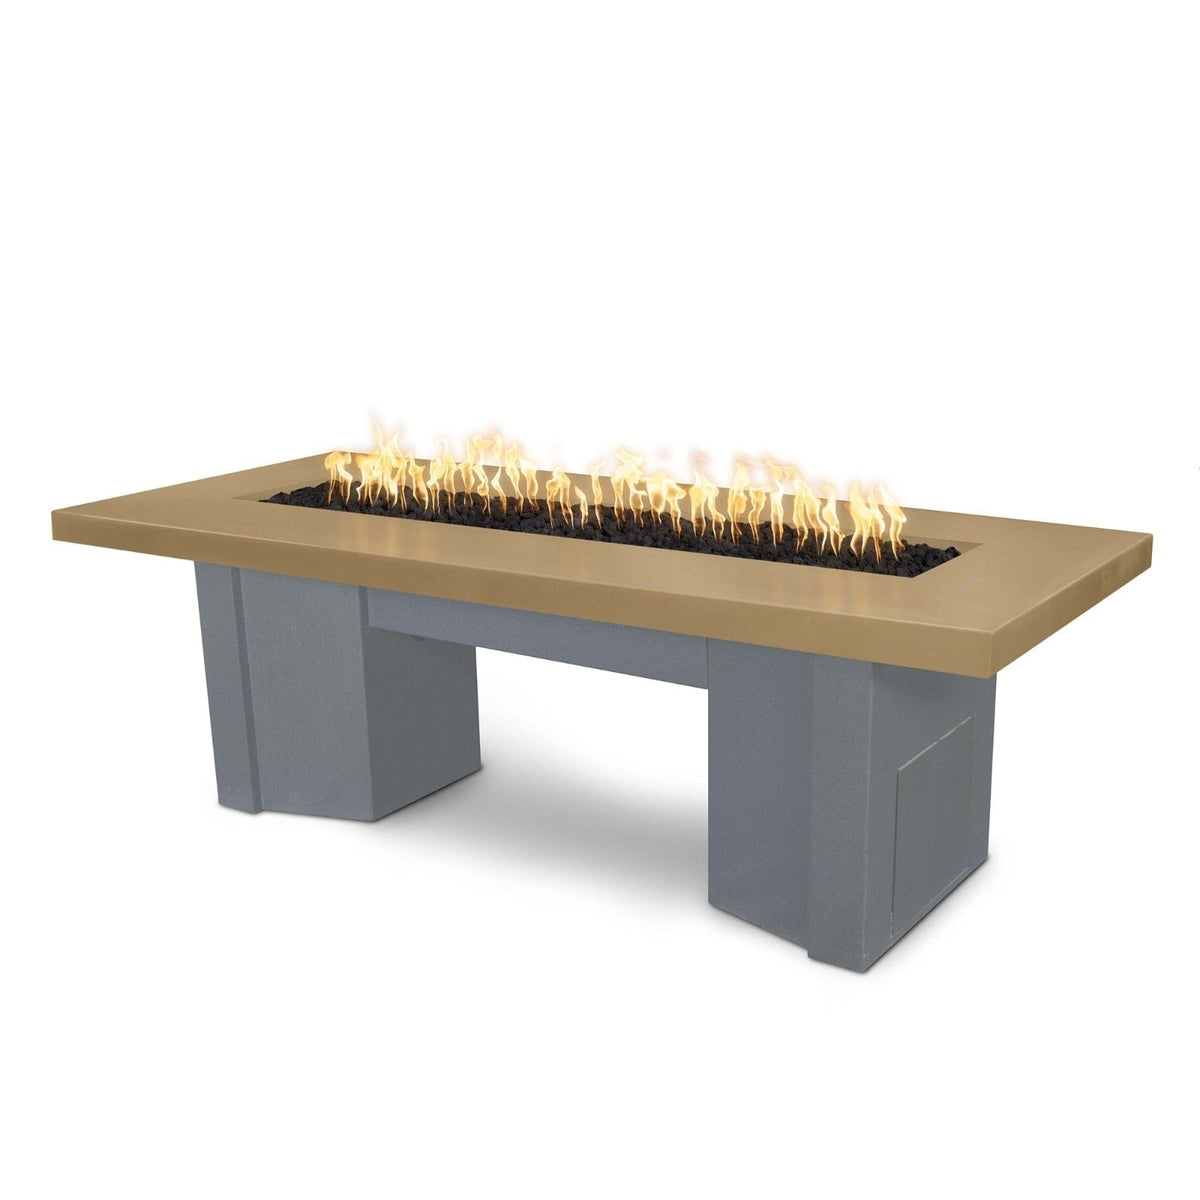 The Outdoor Plus Fire Features Brown (-BRN) / Gray Powder Coated Steel (-GRY) The Outdoor Plus 78&quot; Alameda Fire Table Smooth Concrete in Liquid Propane - Match Lit with Flame Sense System / OPT-ALMGFRC78FSML-LP